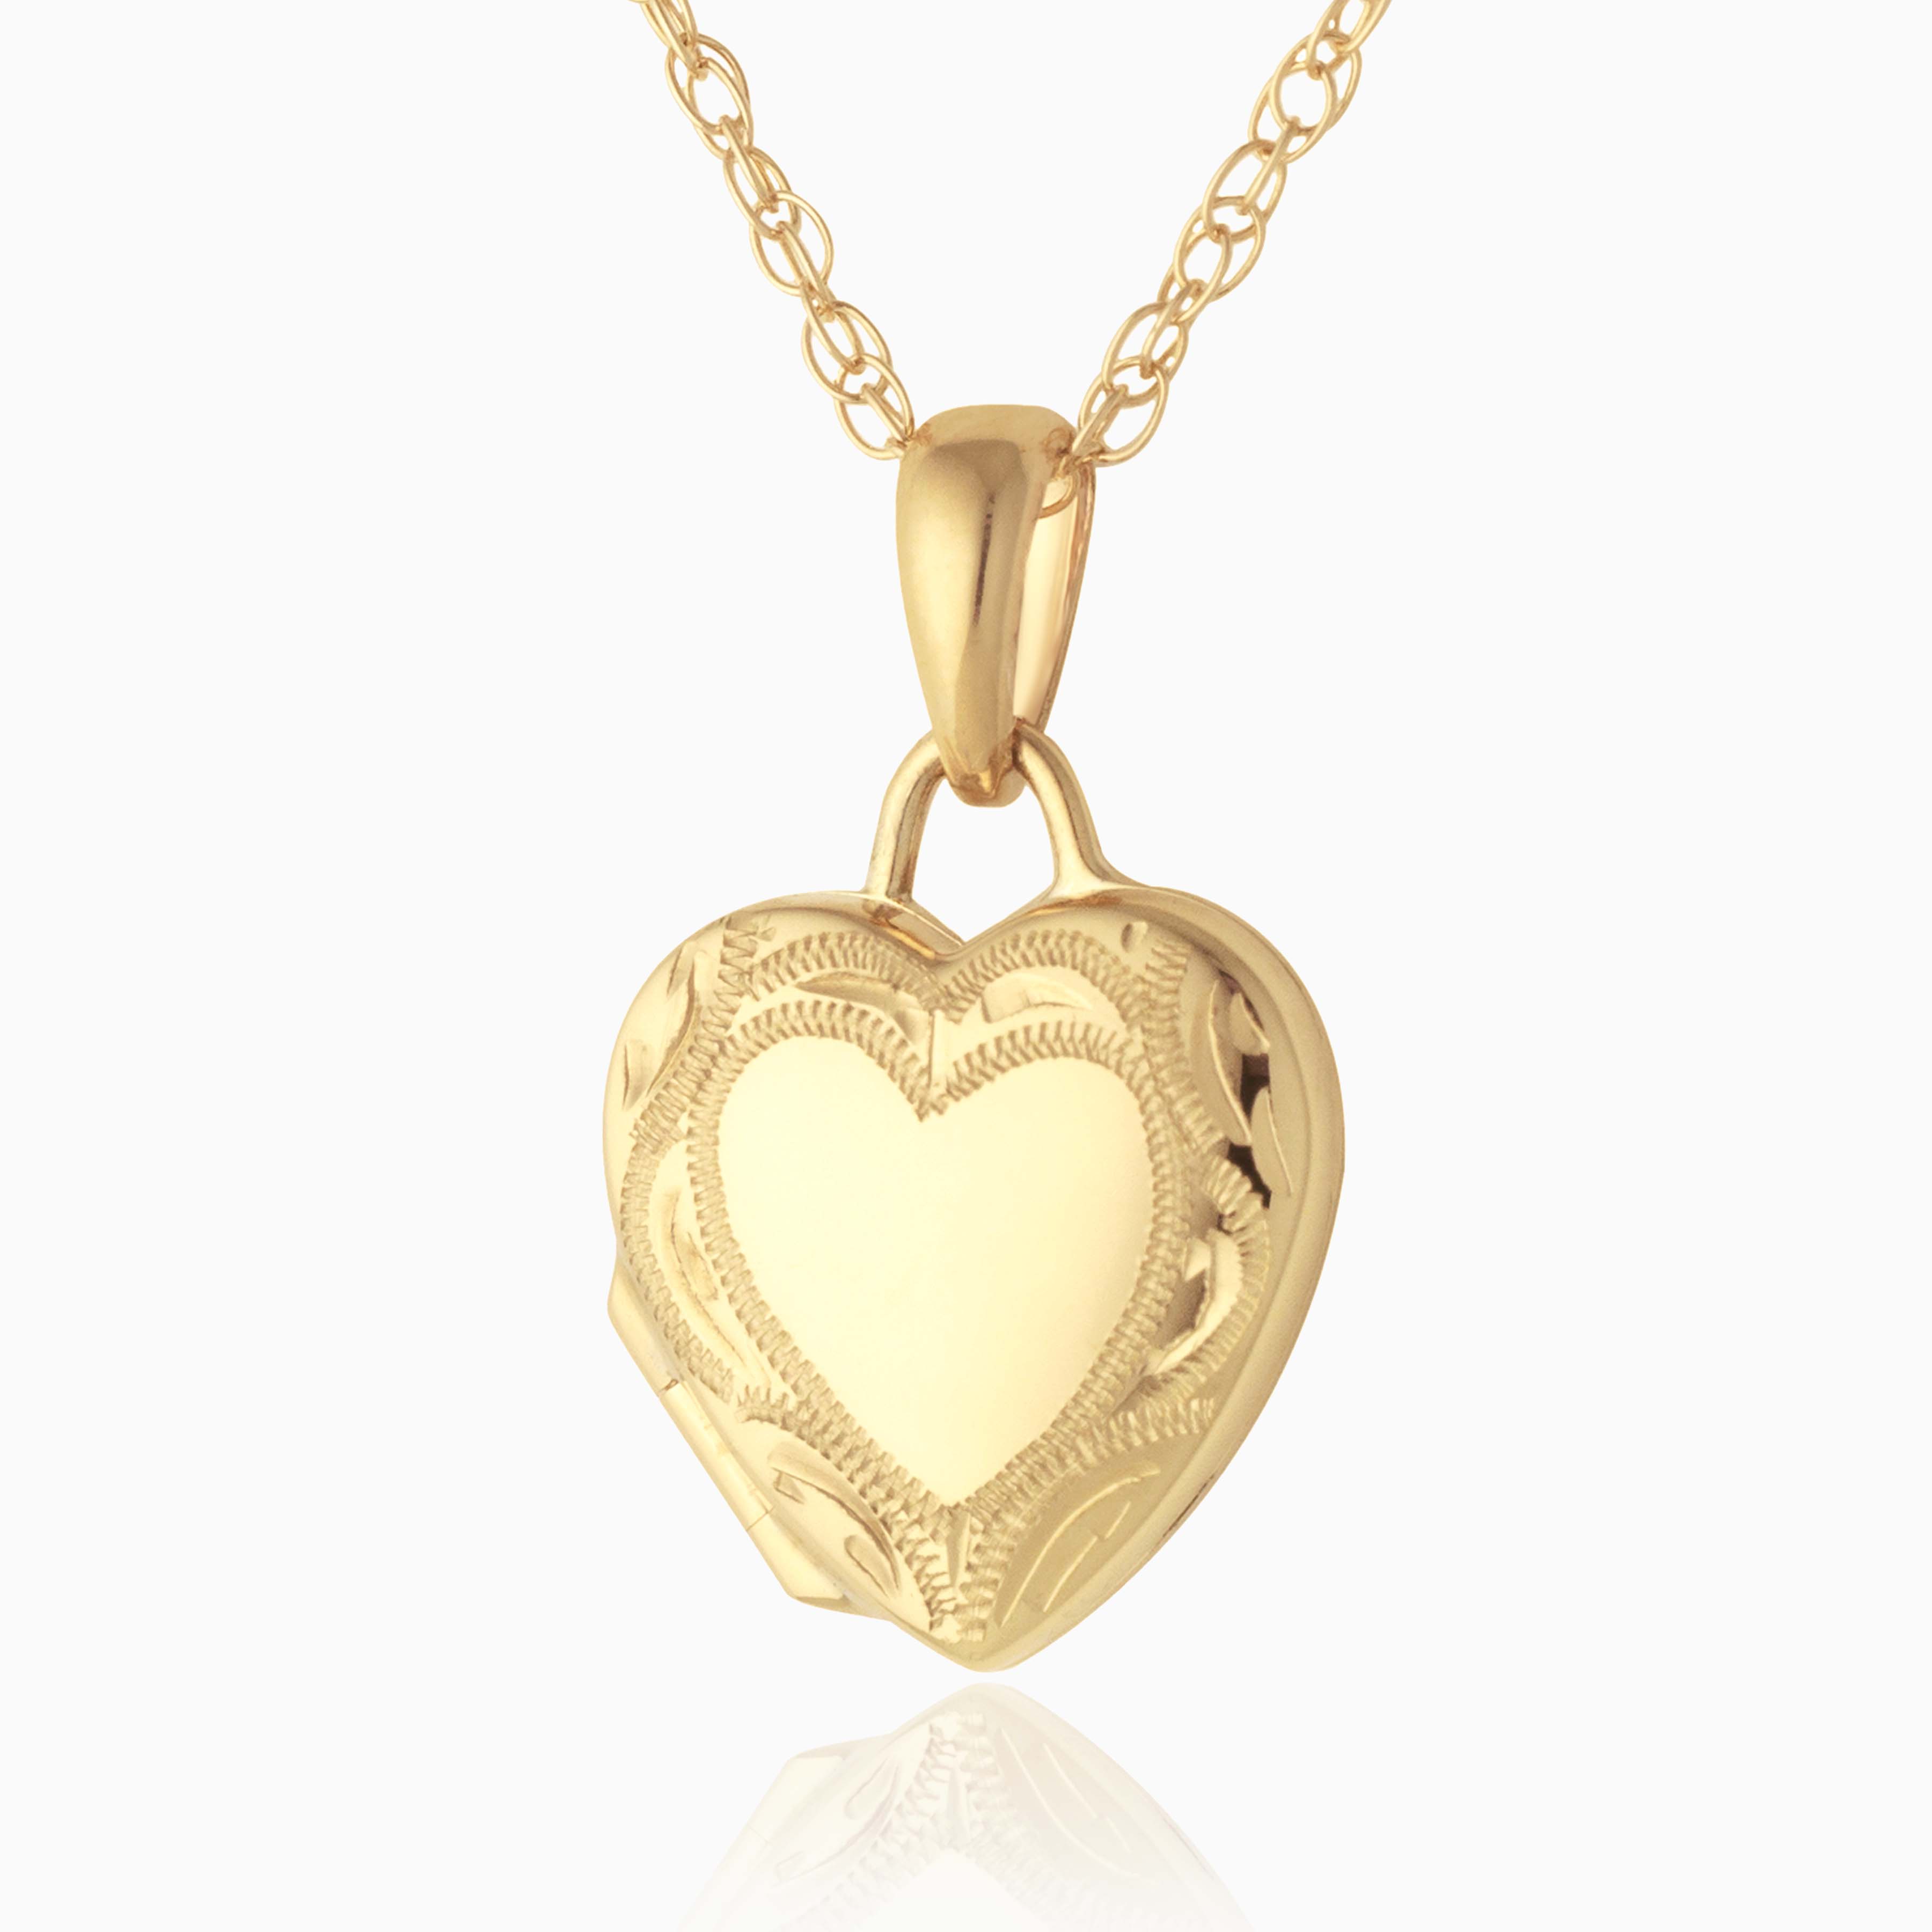 Product title: Tiny Engraved Border Locket, product type: Necklaces